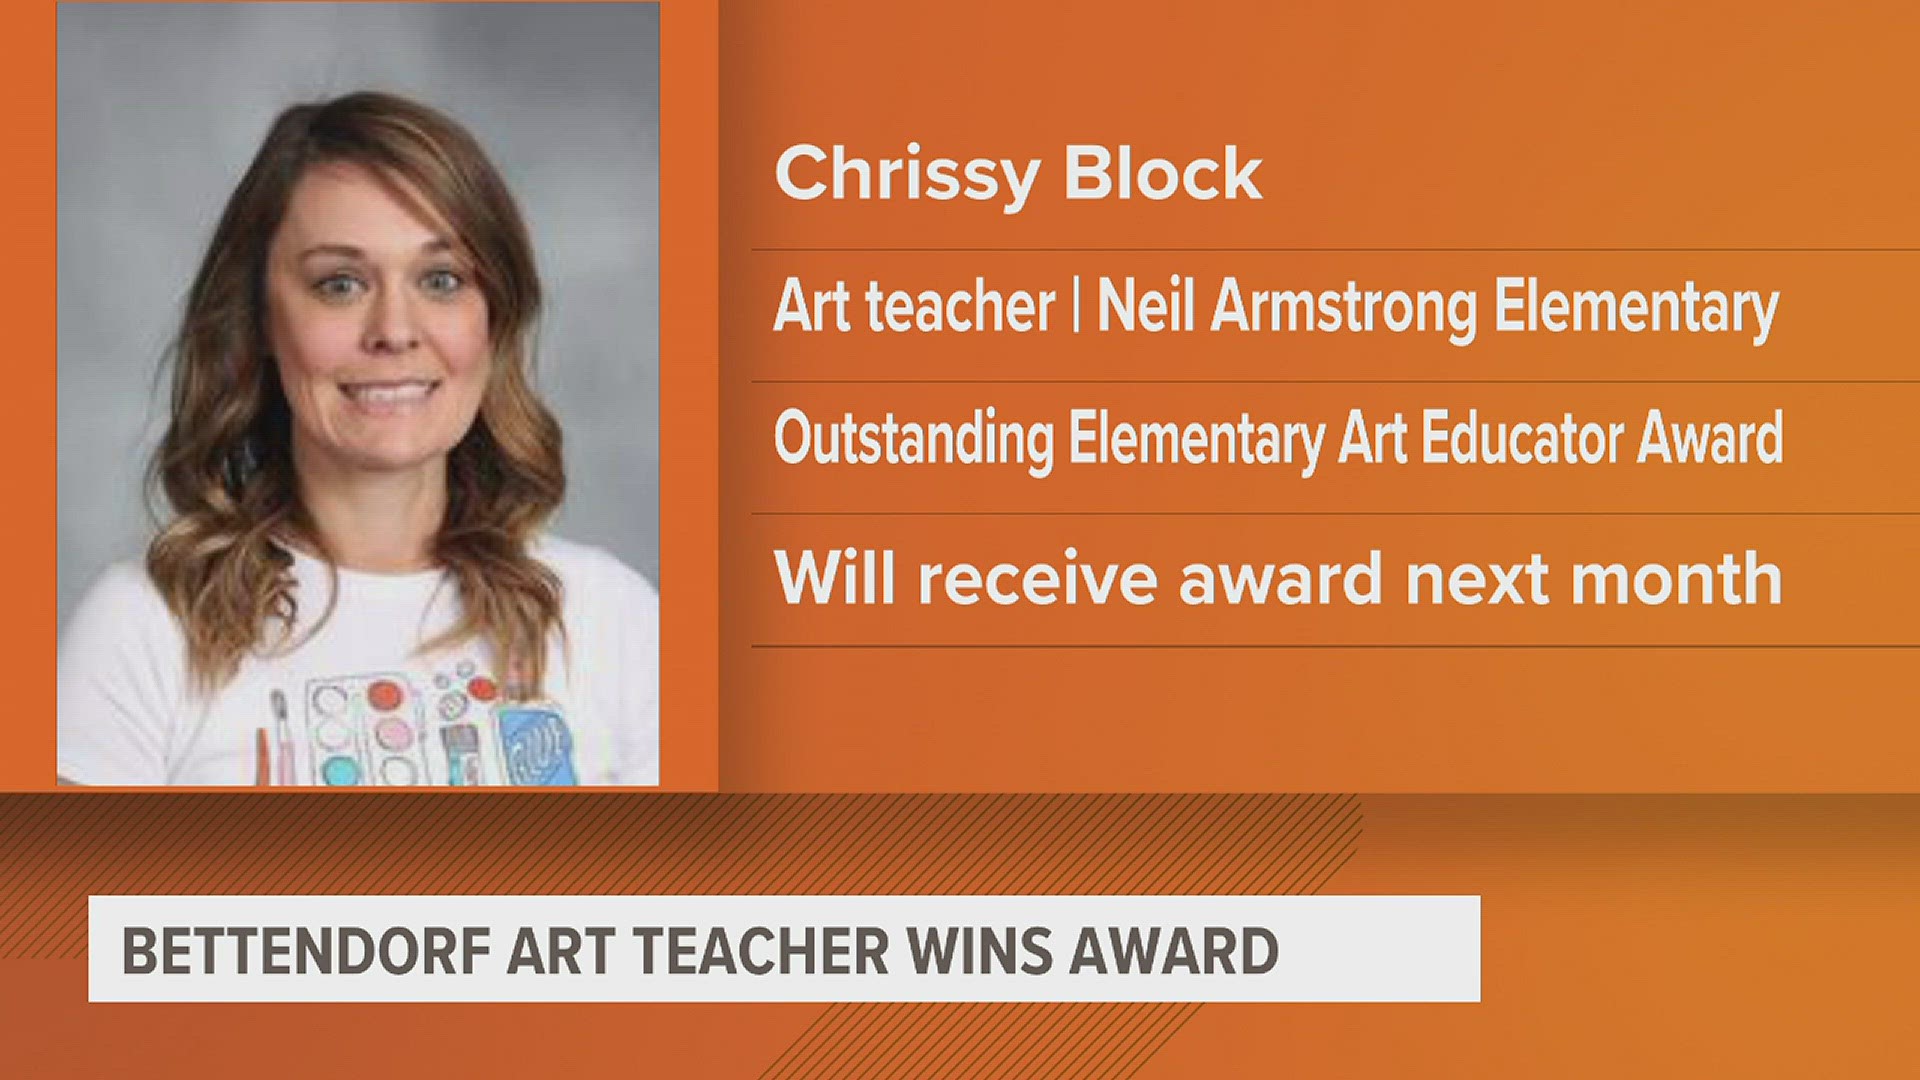 Chrissy Block, an art teacher at Neil Armstrong Elementary, is being awarded the Outstanding Elementary Art Educator of the Year title.